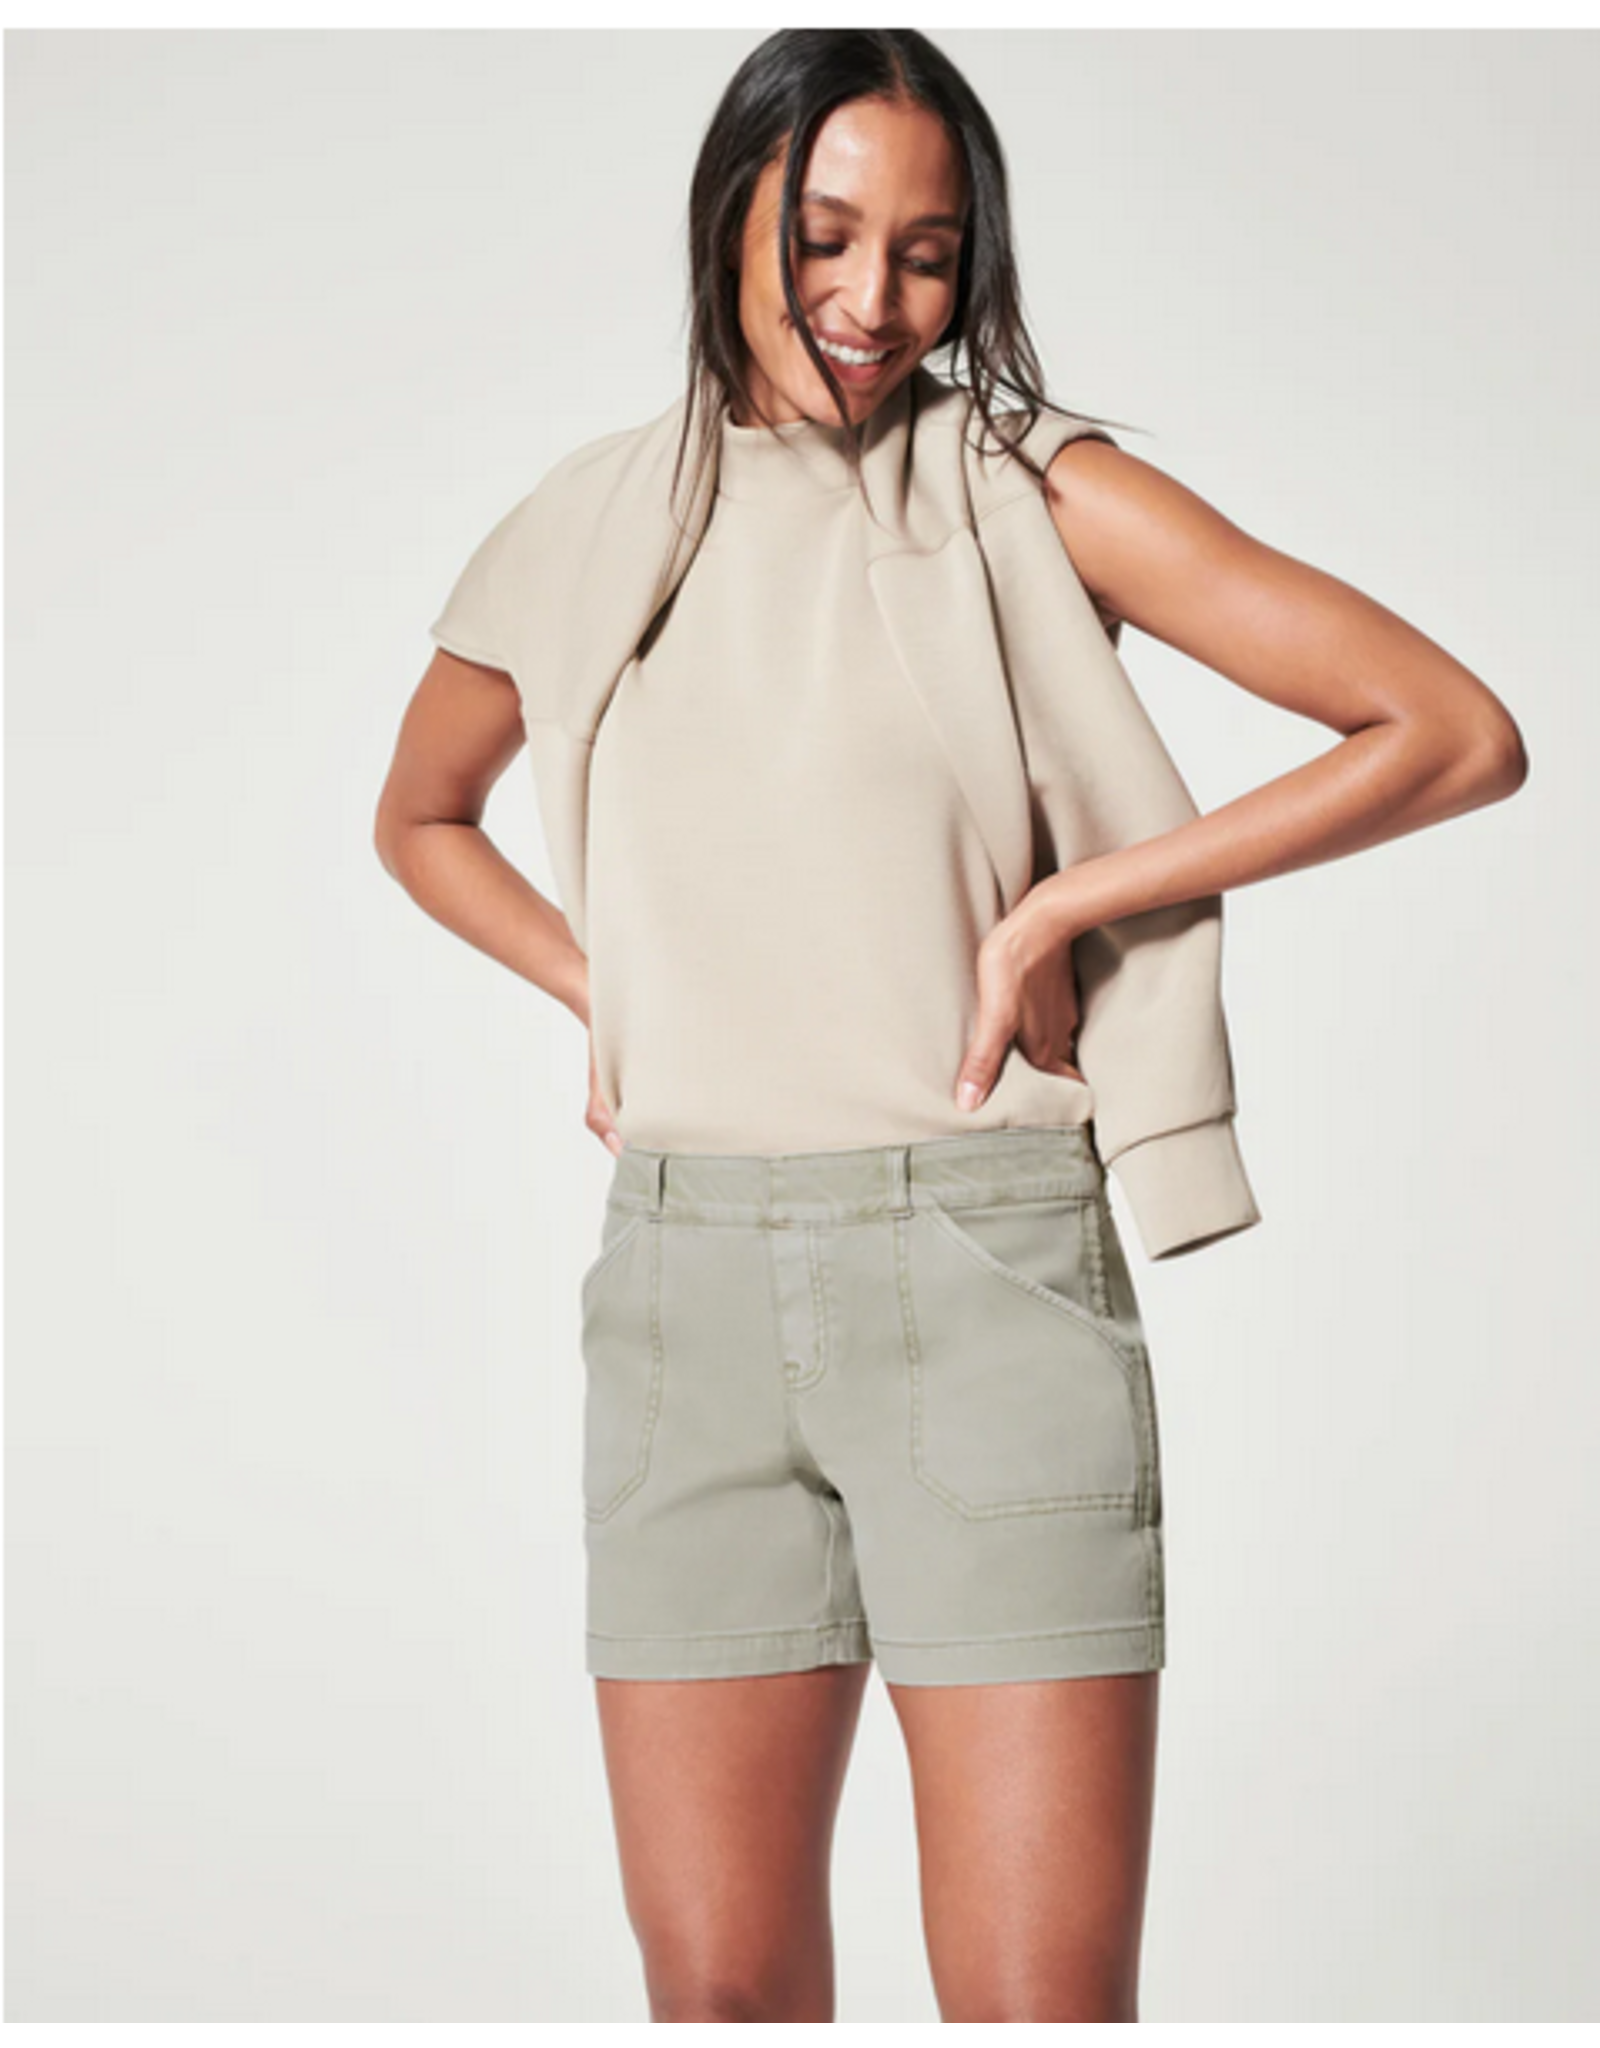 Spanx Spanx Stretch Twill Trouser Short Tuscan Olive